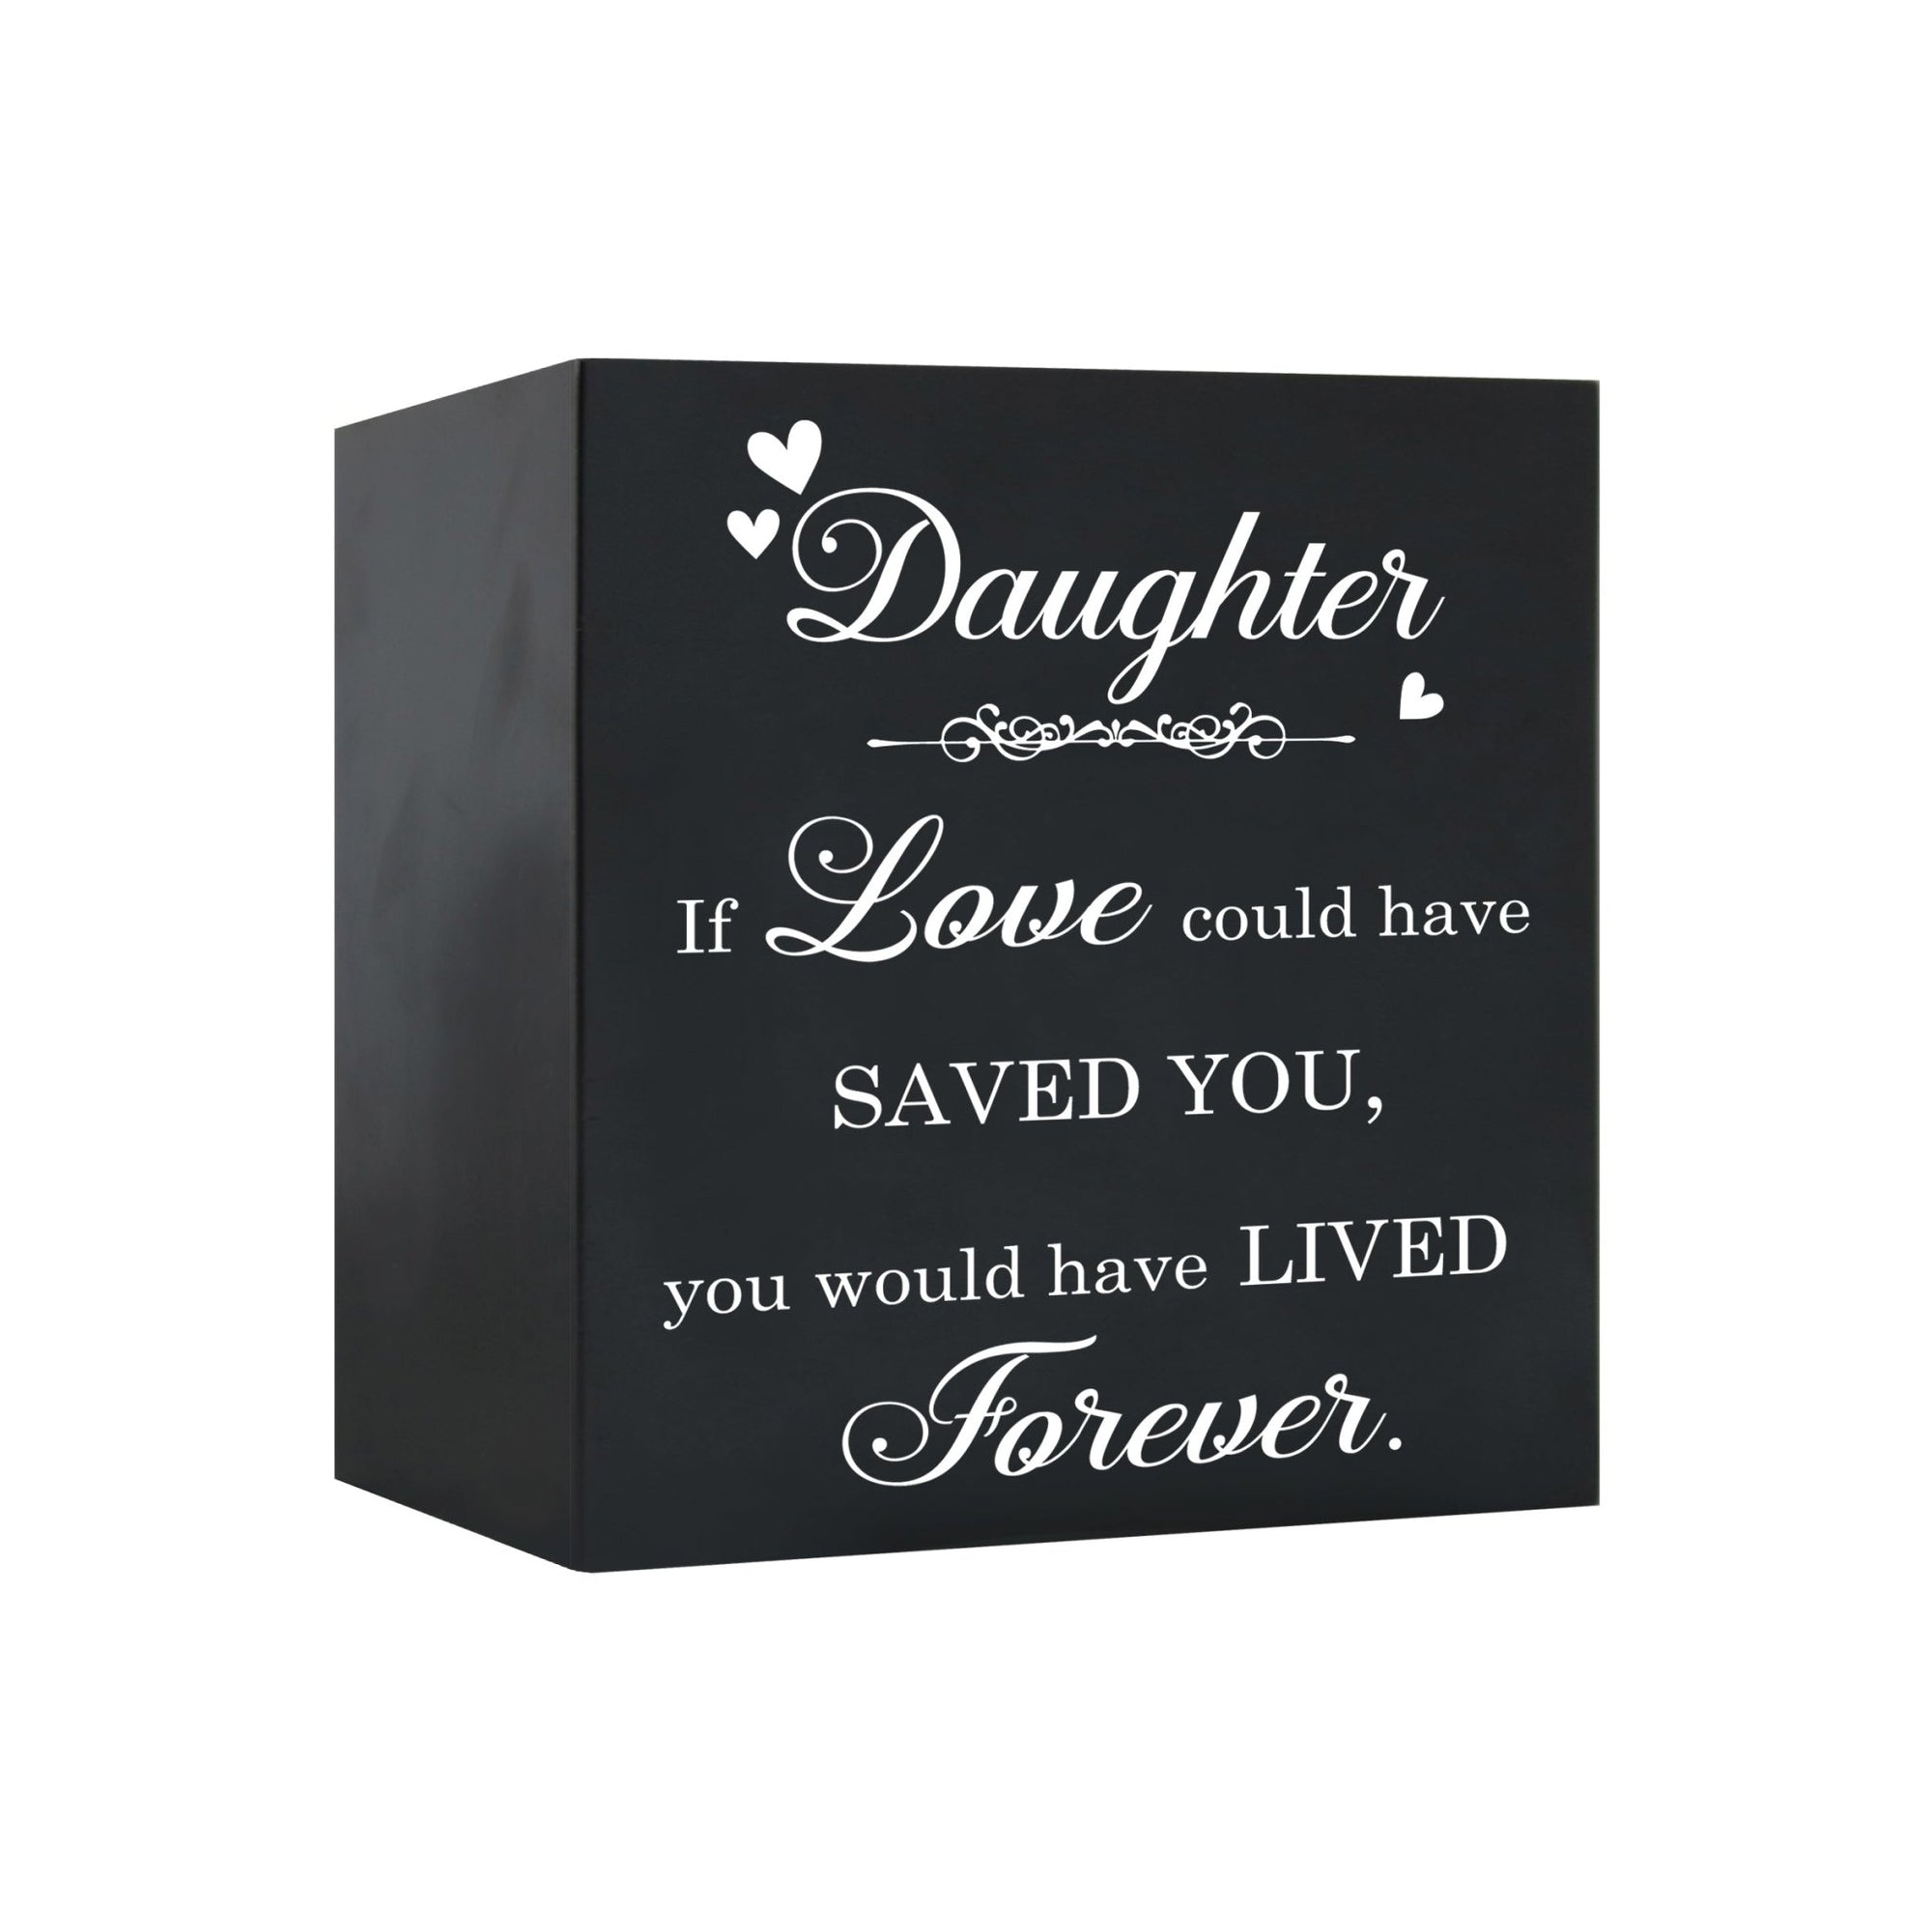 Memorial Bereavement Keepsake Cremation Shadow Box and Urn 6x6in Holds 53 Cu Inches Of Human Ashes Daughter, If Love Could - LifeSong Milestones